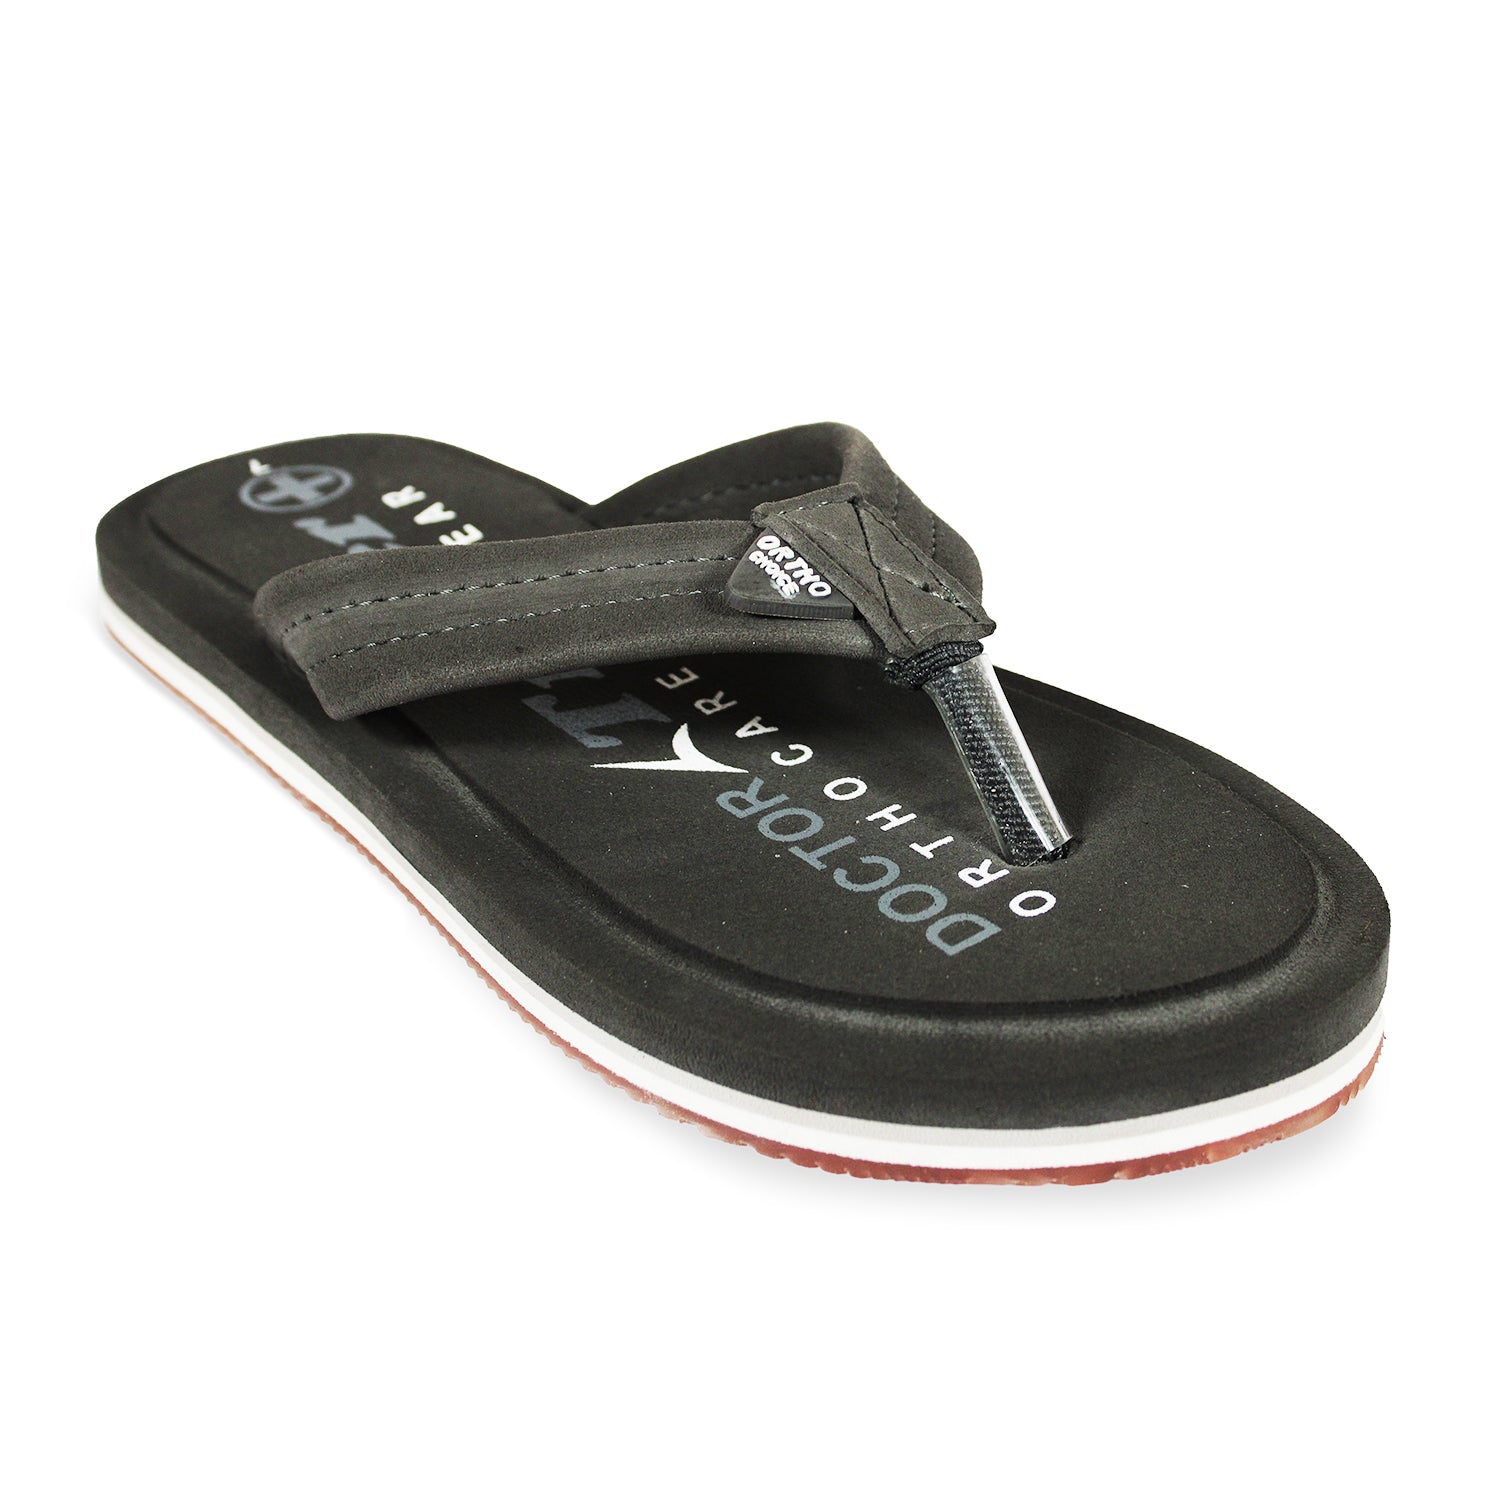 Buy Ortho + Rest Men's 100% Comfort Extra Soft Ortho Doctor Slippers for Men  | MCR Orthopedic Footwear | Comfortable Flip-Flops Chappal for Home Daily  Use Online In India At Discounted Prices